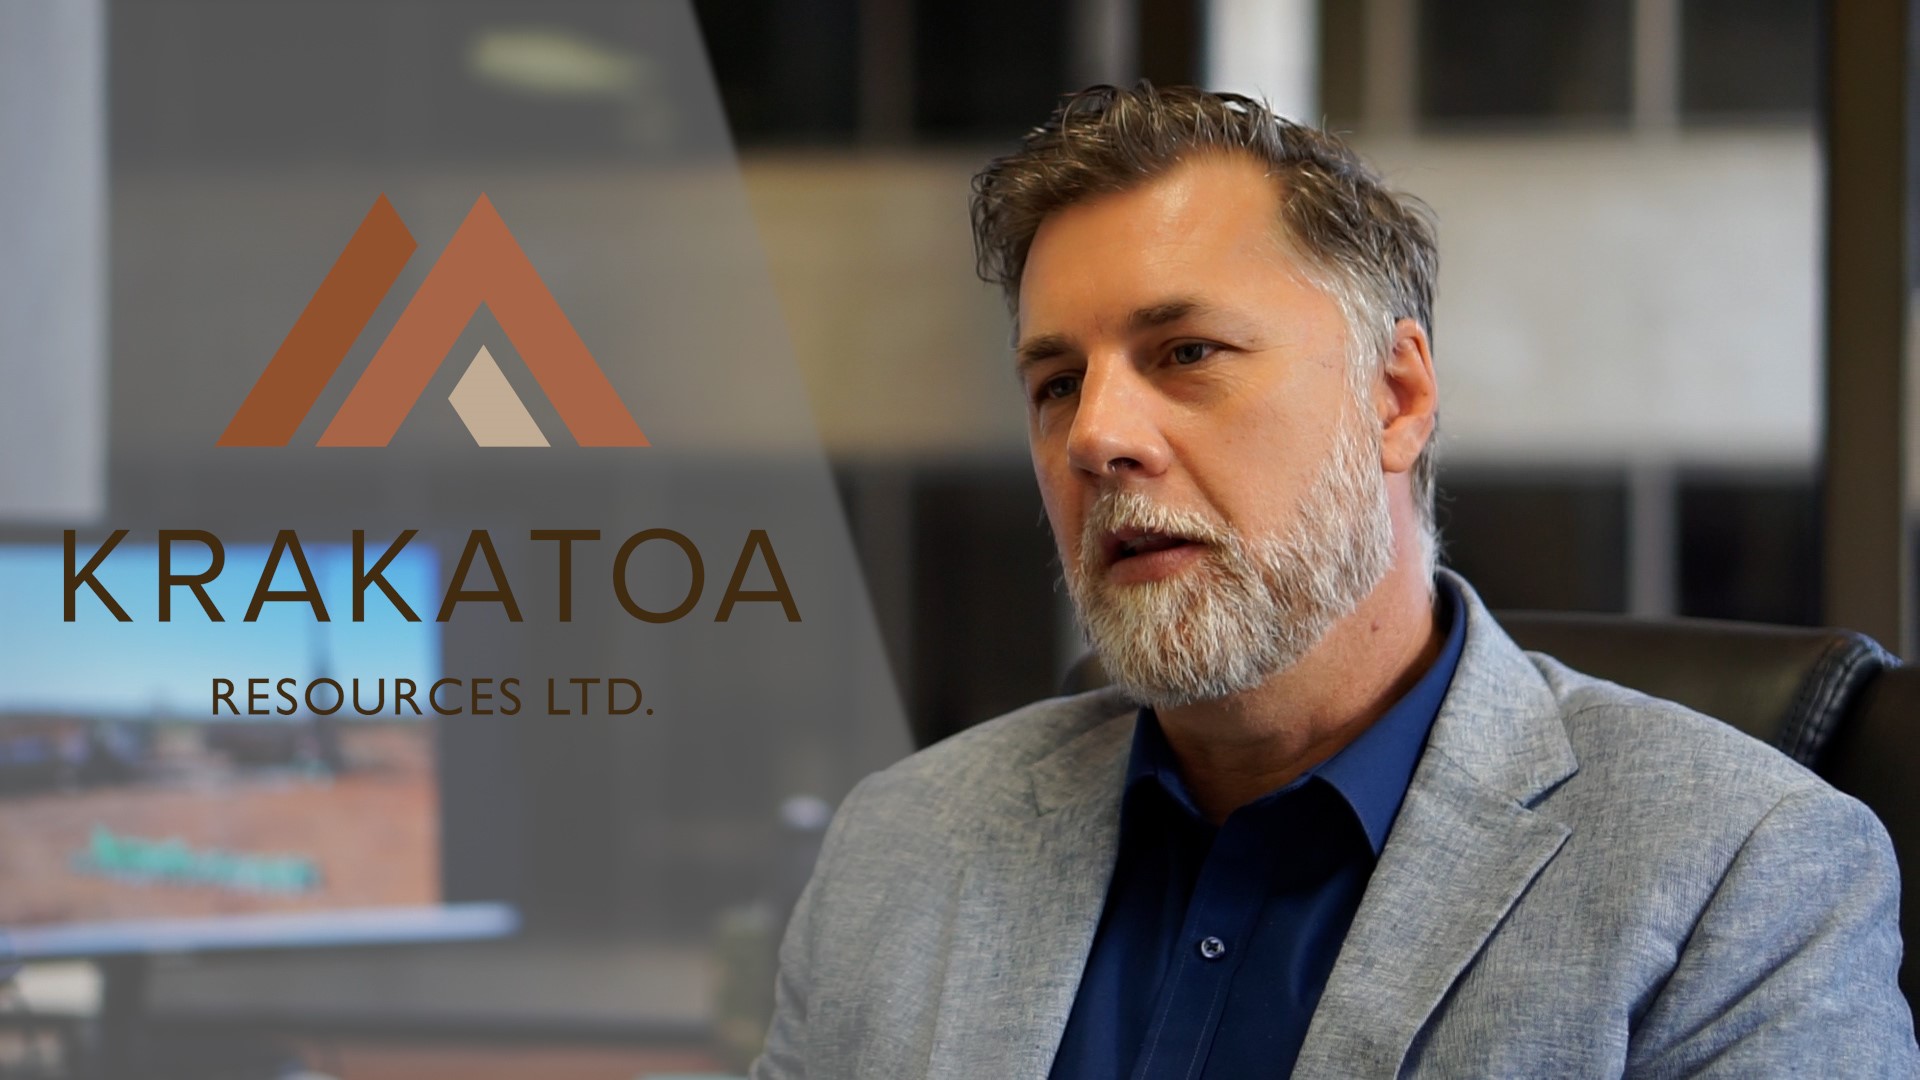 KRAKATOA RESOURCES LIMITED OVERVIEW AND EXPLORATION PROGRAM UPDATE BY CEO MARK MAJOR